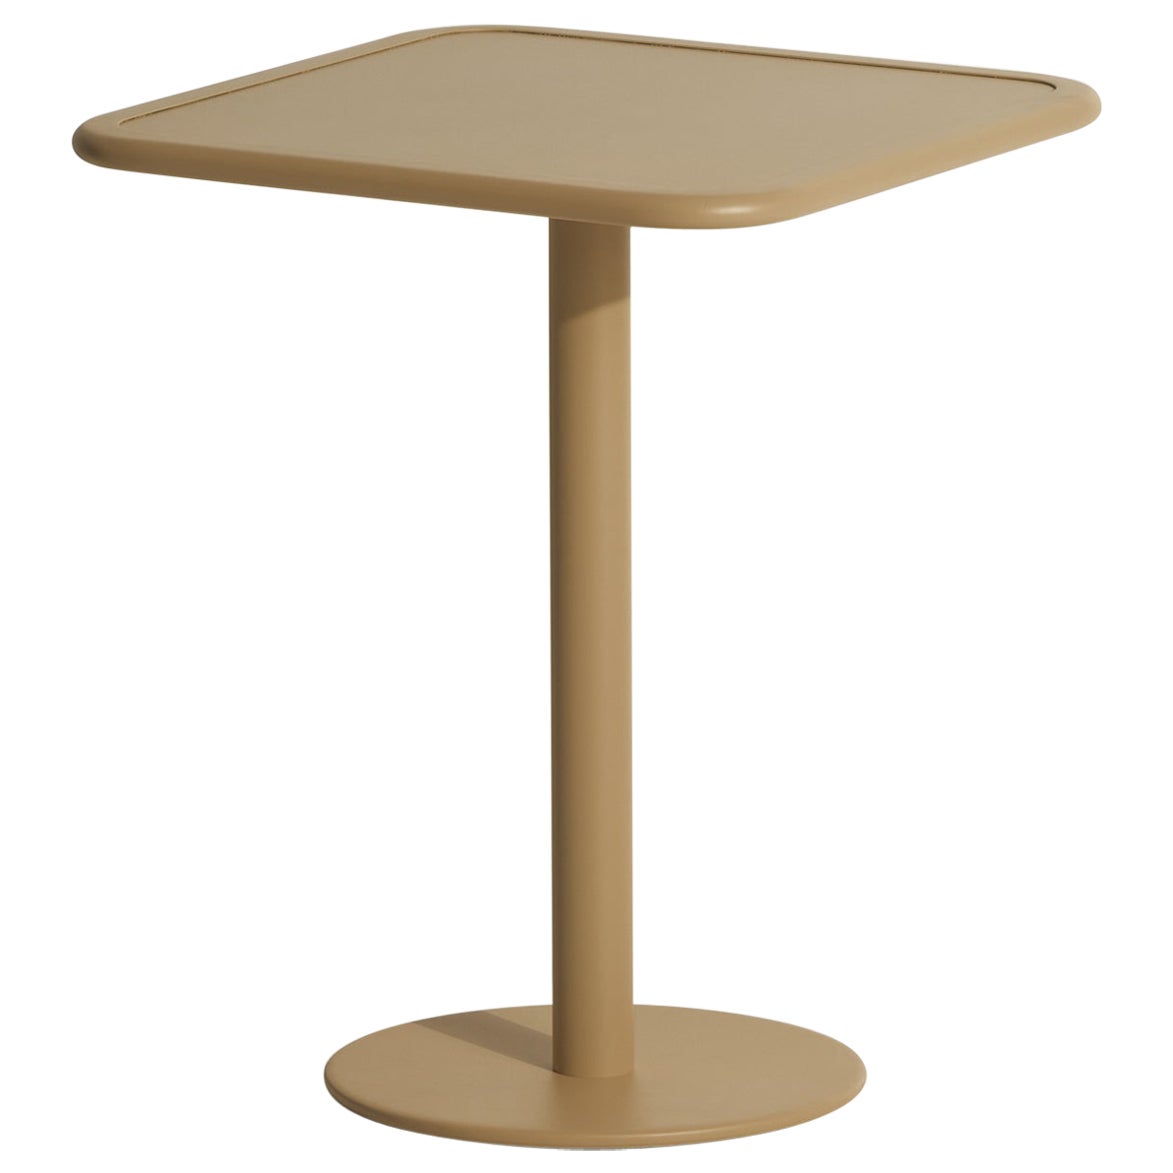 Petite Friture Week-End Bistro Square Dining Table in Gold Aluminium, 2017 For Sale